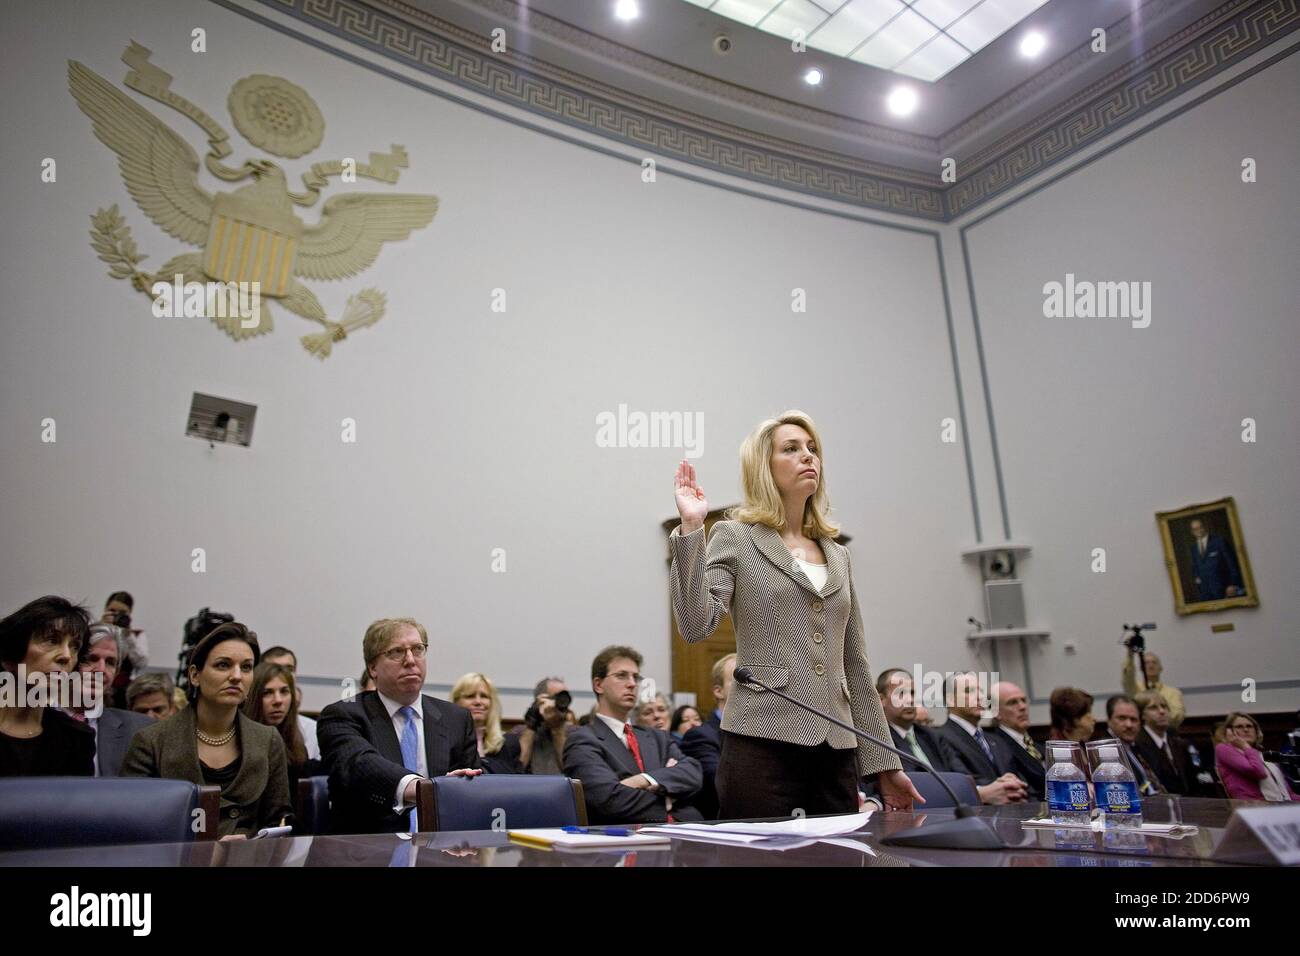 NO FILM, NO VIDEO, NO TV, NO DOCUMENTARY - Former CIA officer Valerie Plame, who was exposed after her husband, former diplomat Joseph Wilson, criticized President Bush's pre-war intelligence on Iraq, testifies before the House Oversight and Government Reform Committee, on Capitol Hill in Washington, D.C., USA on March 16, 2007. Photo by Chuck Kennedy/MCT/ABACAPRESS?CIM Stock Photo